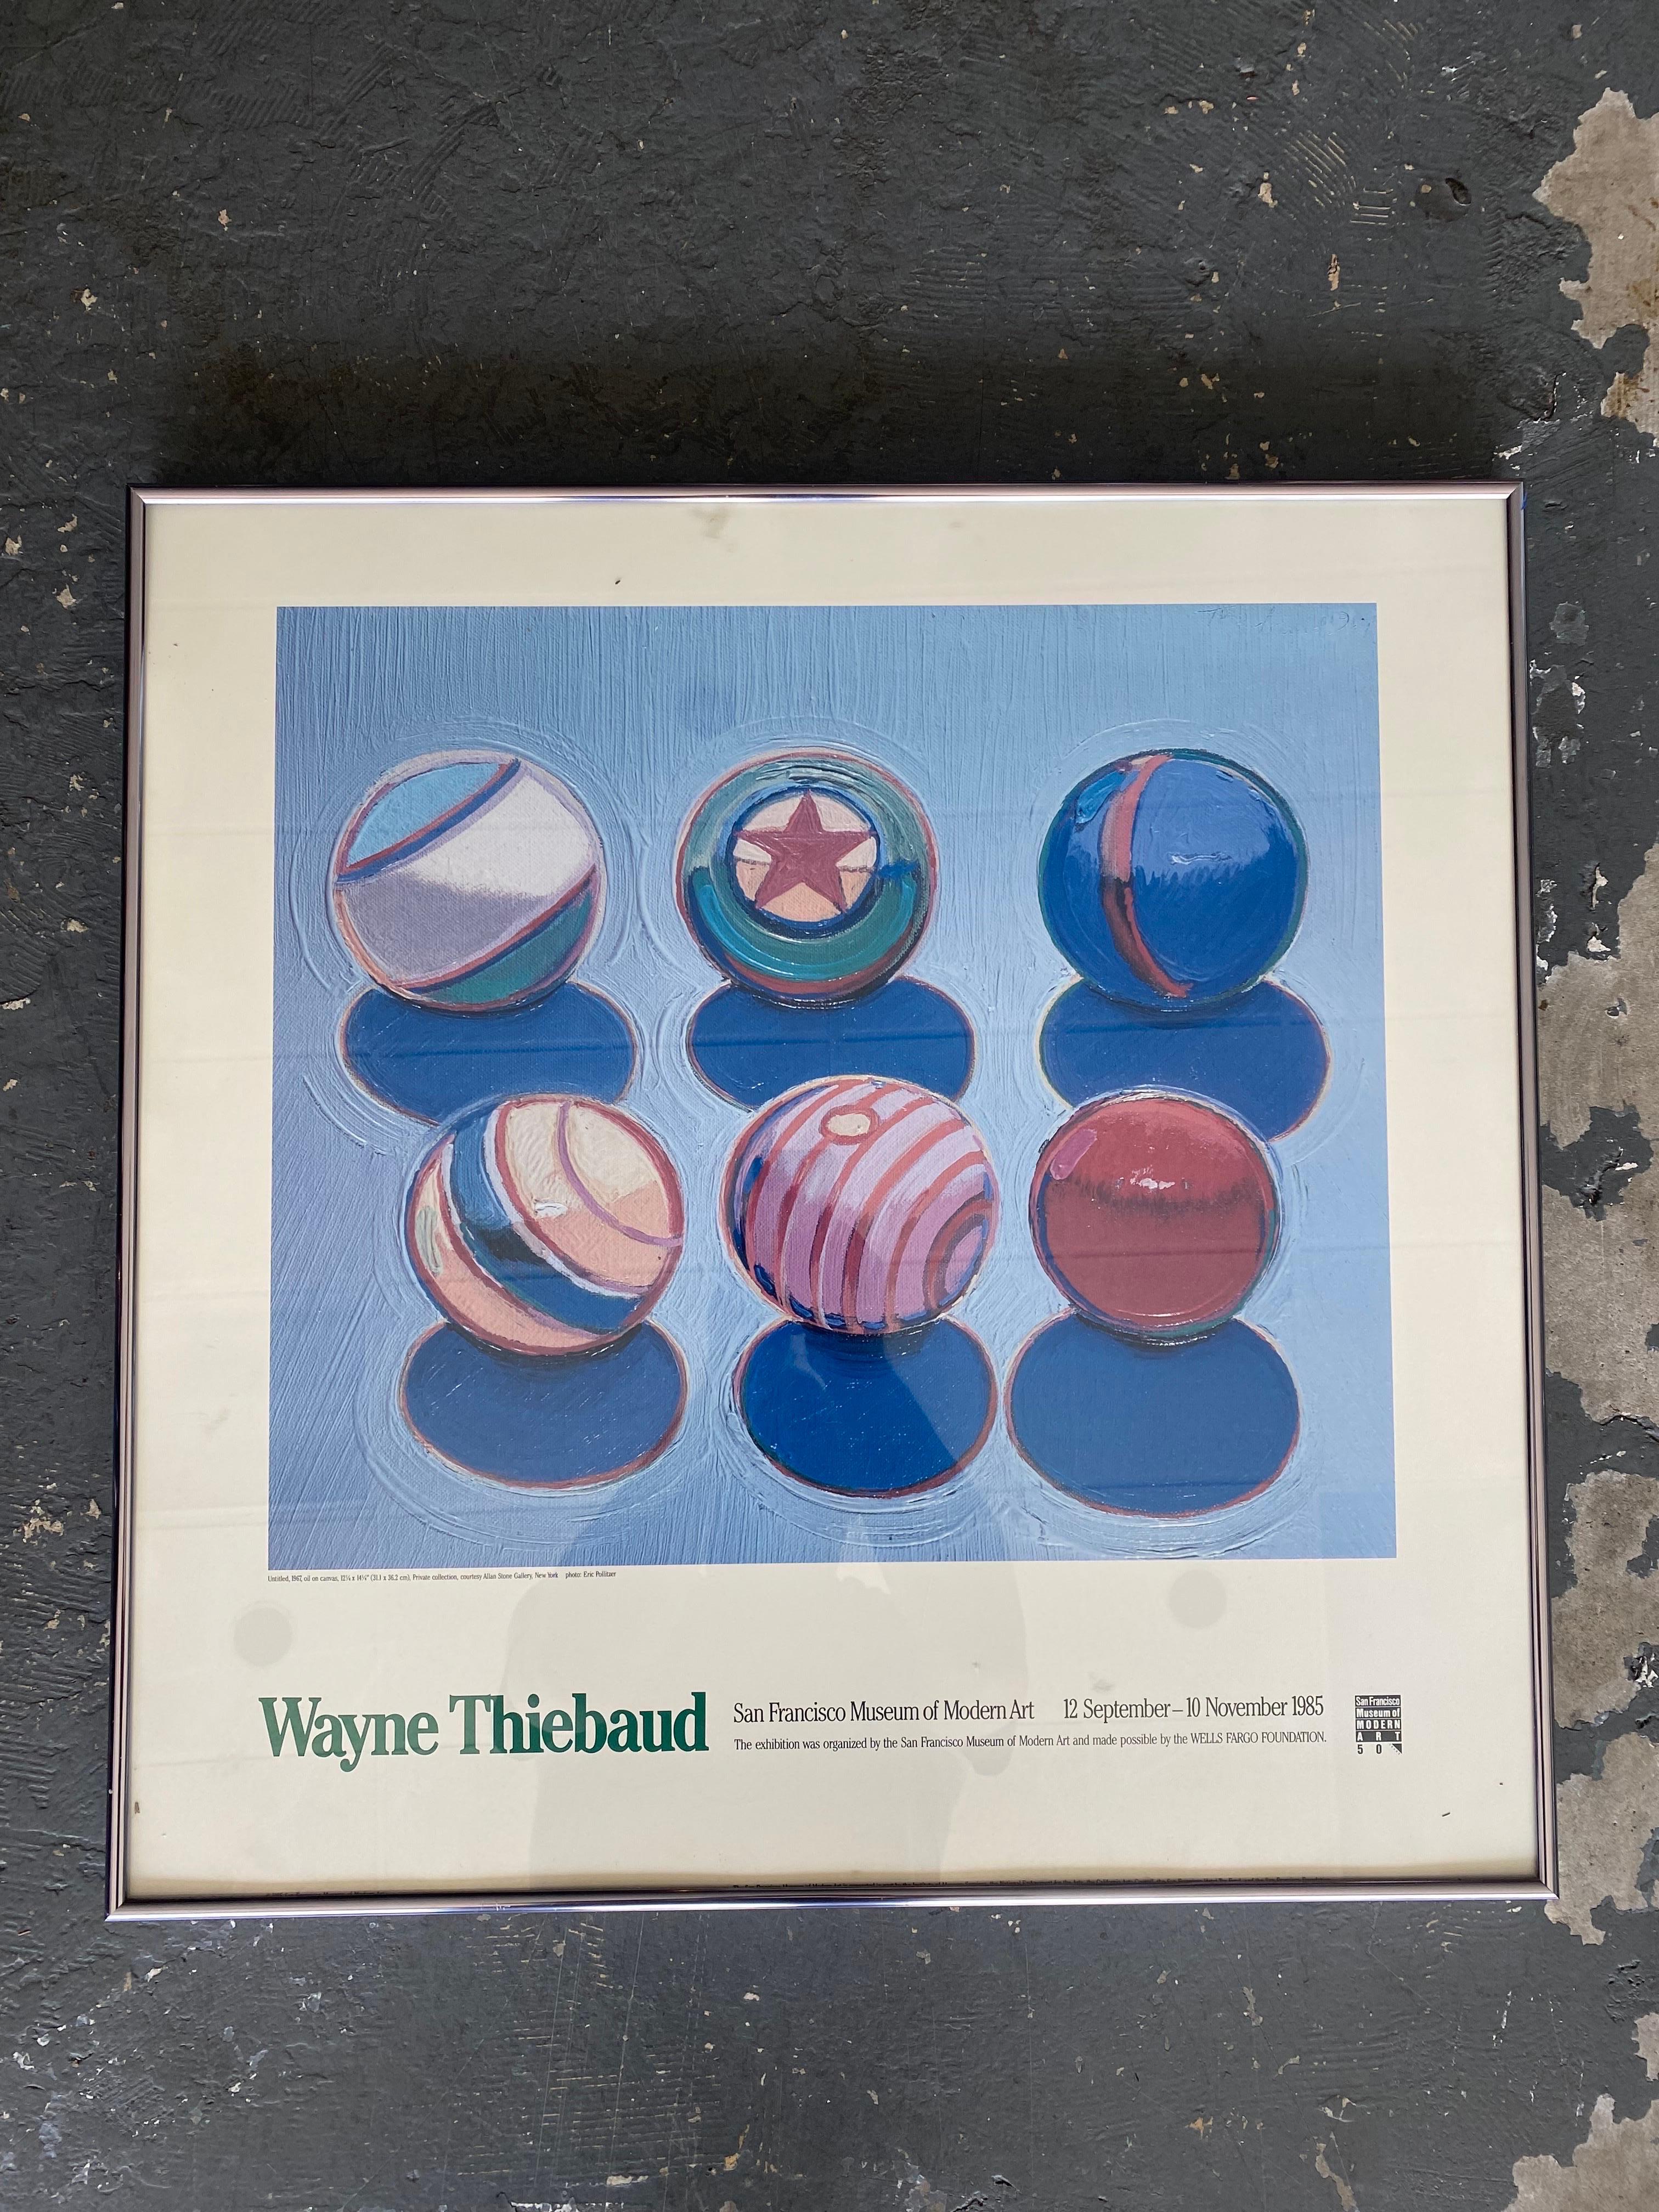 Gorgeous print after famed California artist Wayne Thiebaud to announce a 1985 exhibit at the San Francisco Museum of Modern Art or SFMOMA.

This Print is in very good condition, frame has a few signs of age appropriate wear. See pictures for